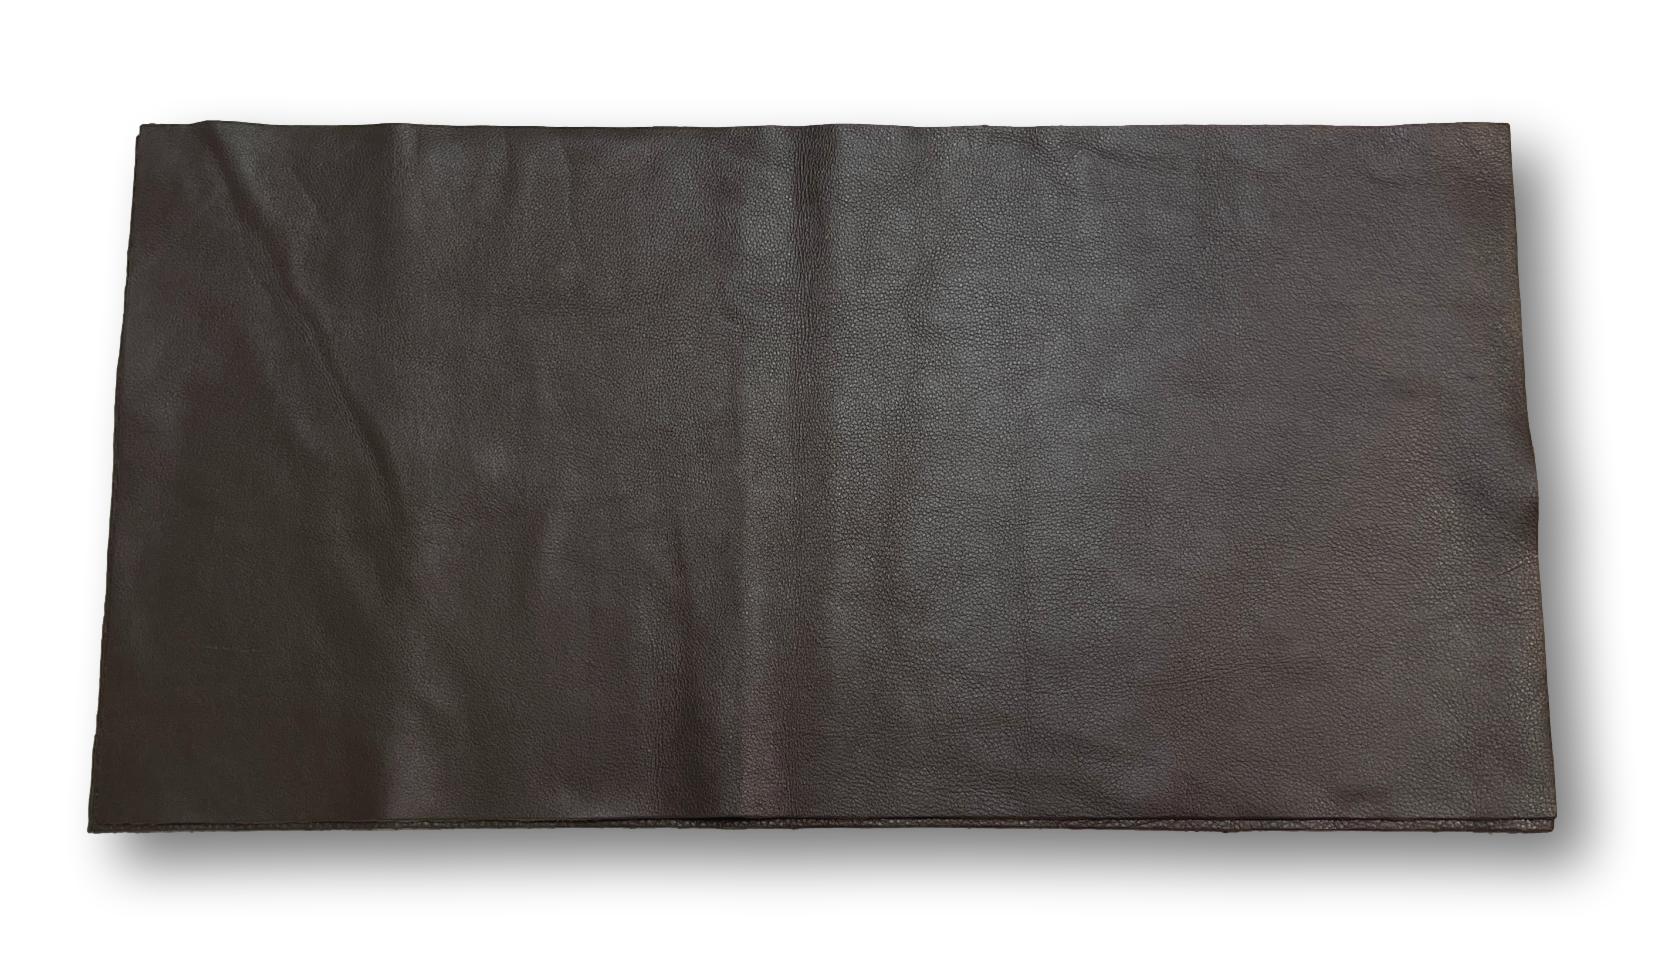 Chocolate Brown Natural Grain Cowhide Leather: 12" x 24" Pre-Cut Craft Pieces